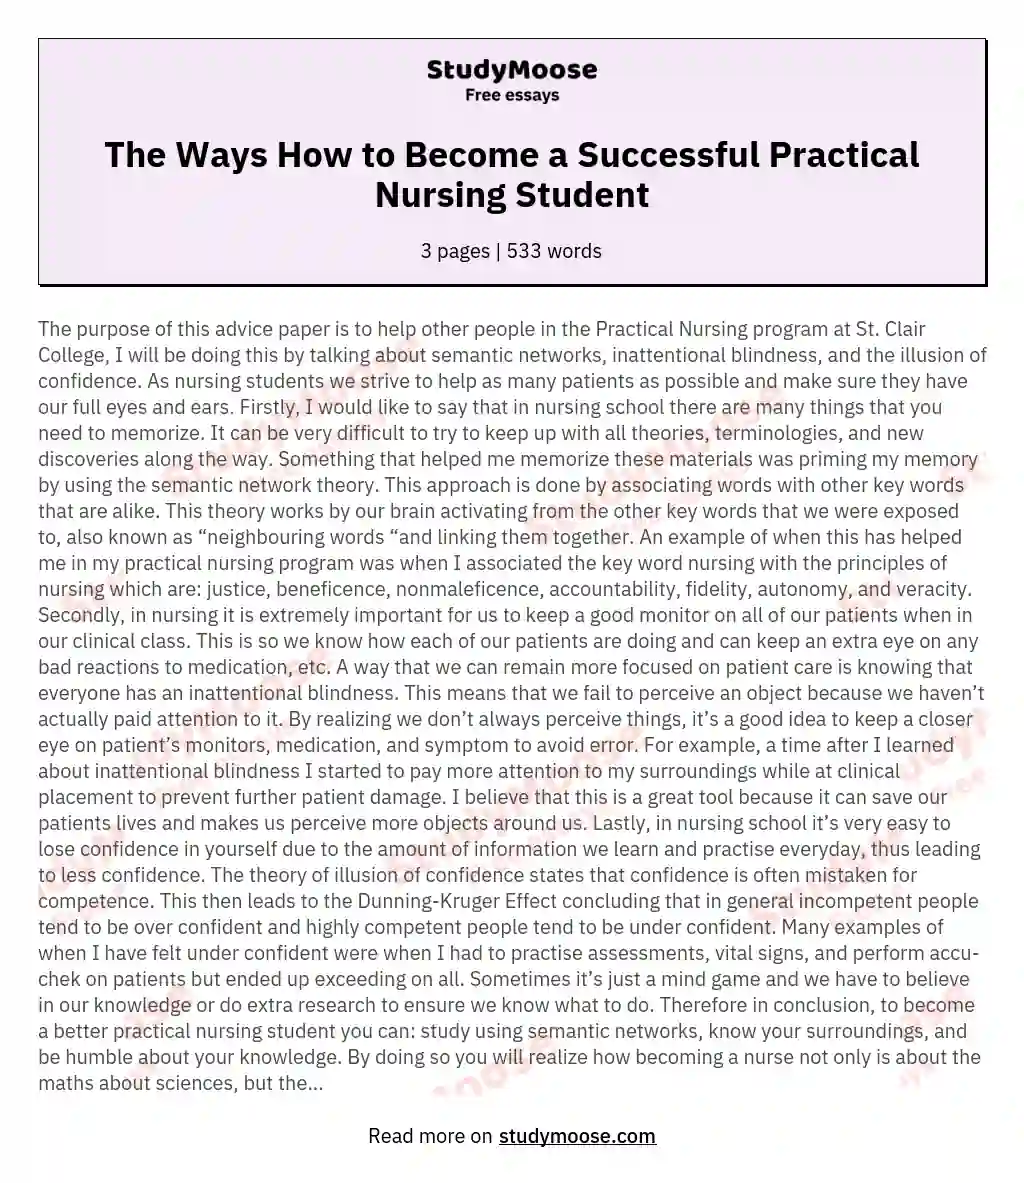 The Ways How to Become a Successful Practical Nursing Student essay